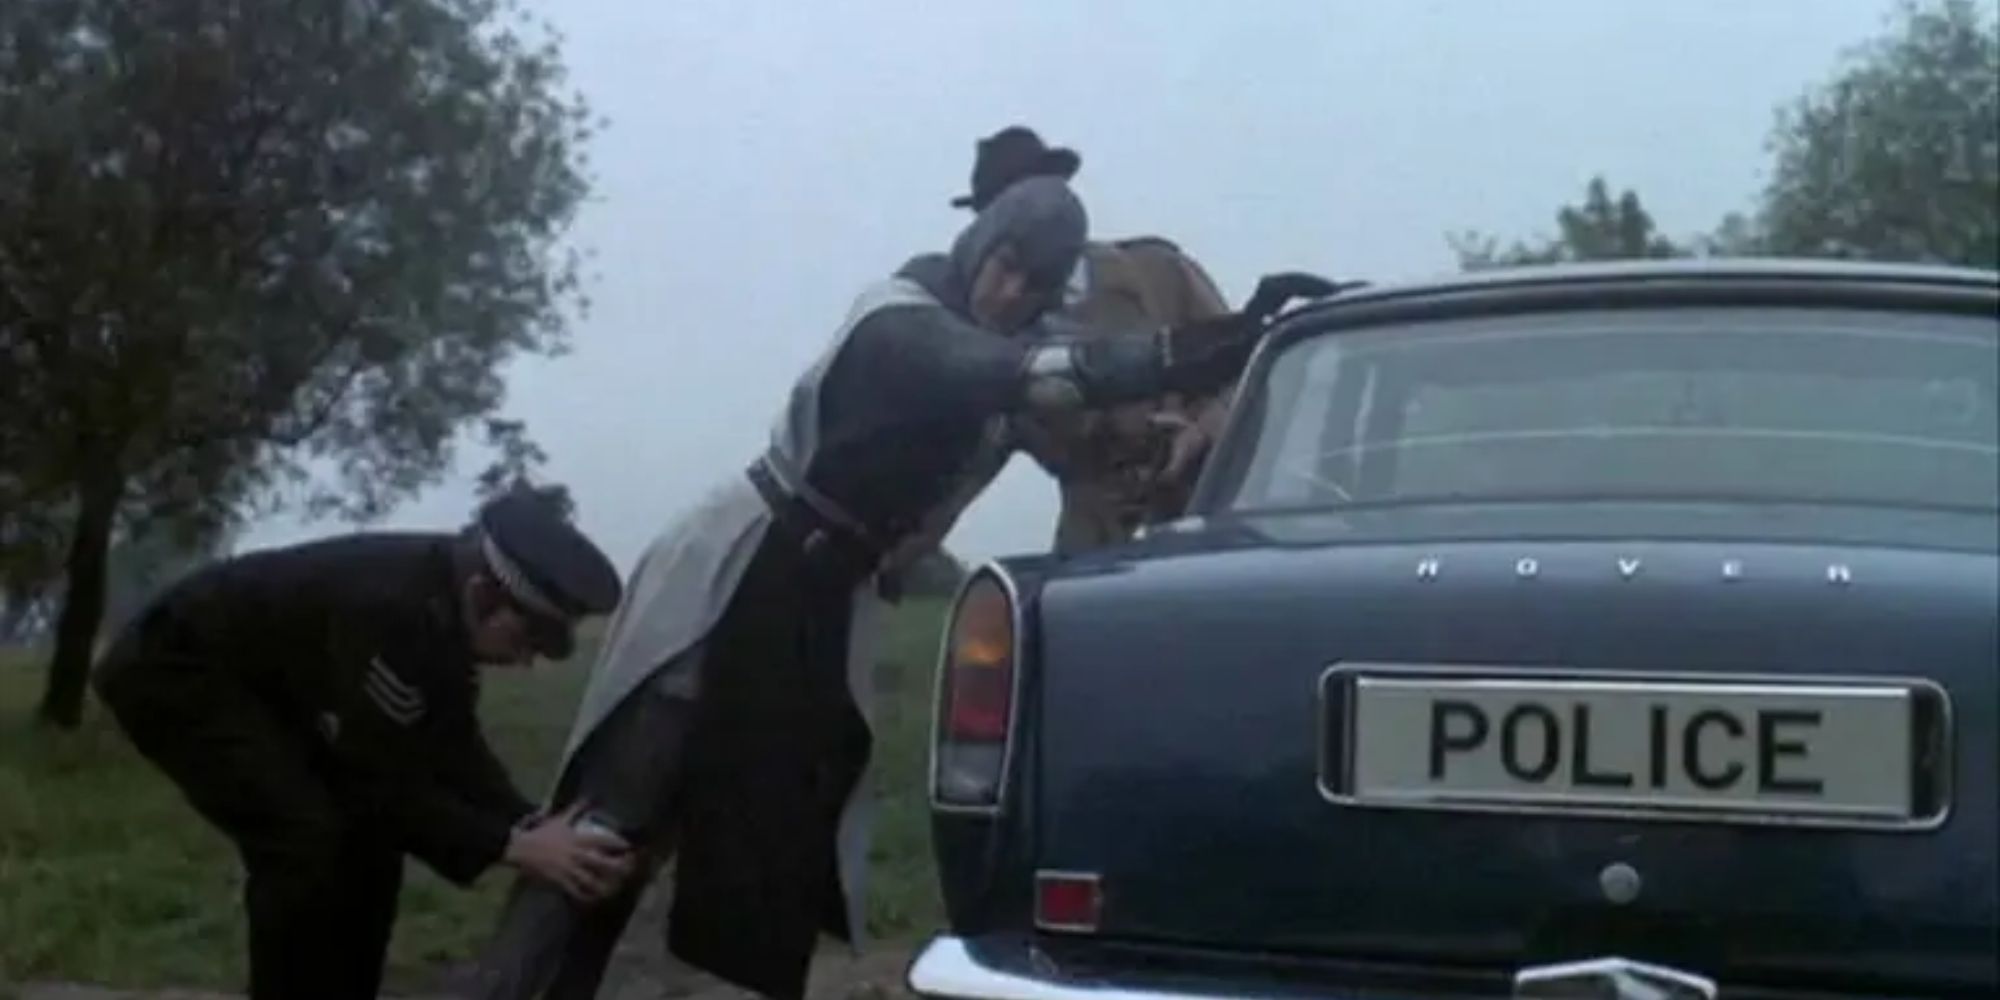 Sir Lancelot is frisked by a police officer 